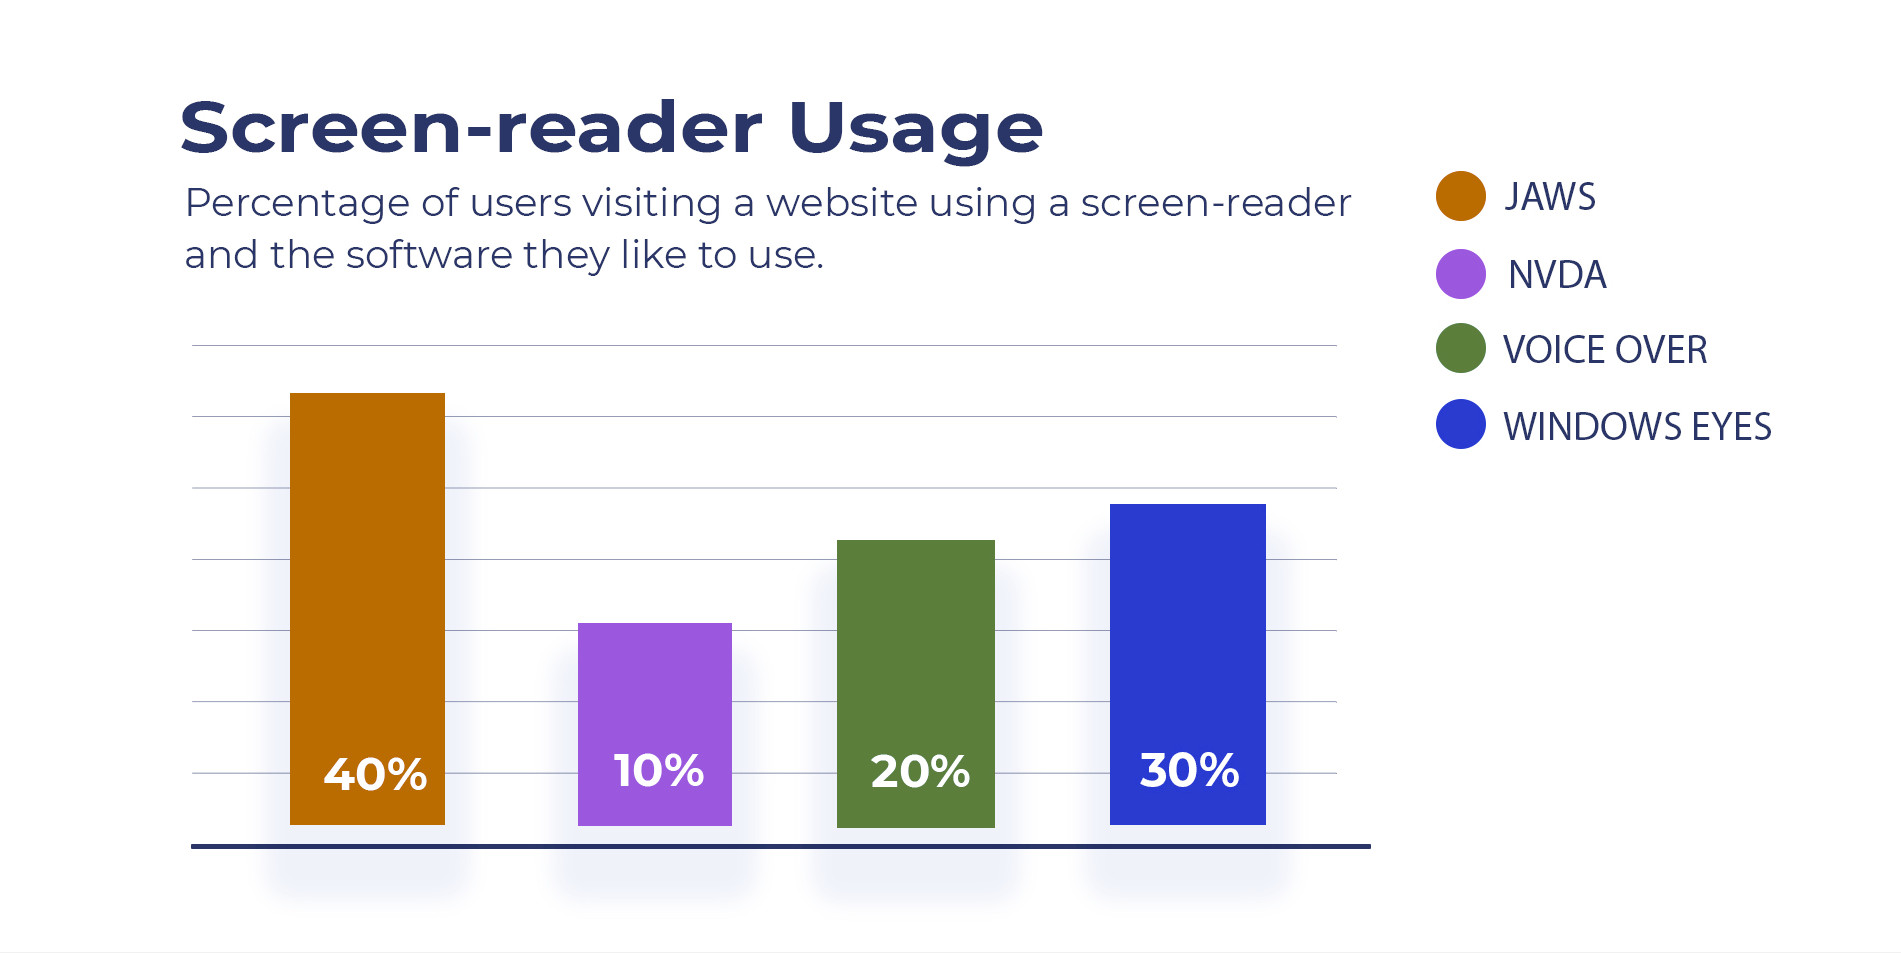 Figure 4 – Green Weak. An example of a bar chart graphic affected by a green weak color deficiency, the design relies on color to convey meaning. The colors are looking different from the original design and it can create confusion to color blind users. The graphic reads - Percentage of users visiting a website using a screen-reader and the software they like to use. 40% JAWS, 10% NVDA, 20% Voice Over, 30% Windows Eyes.